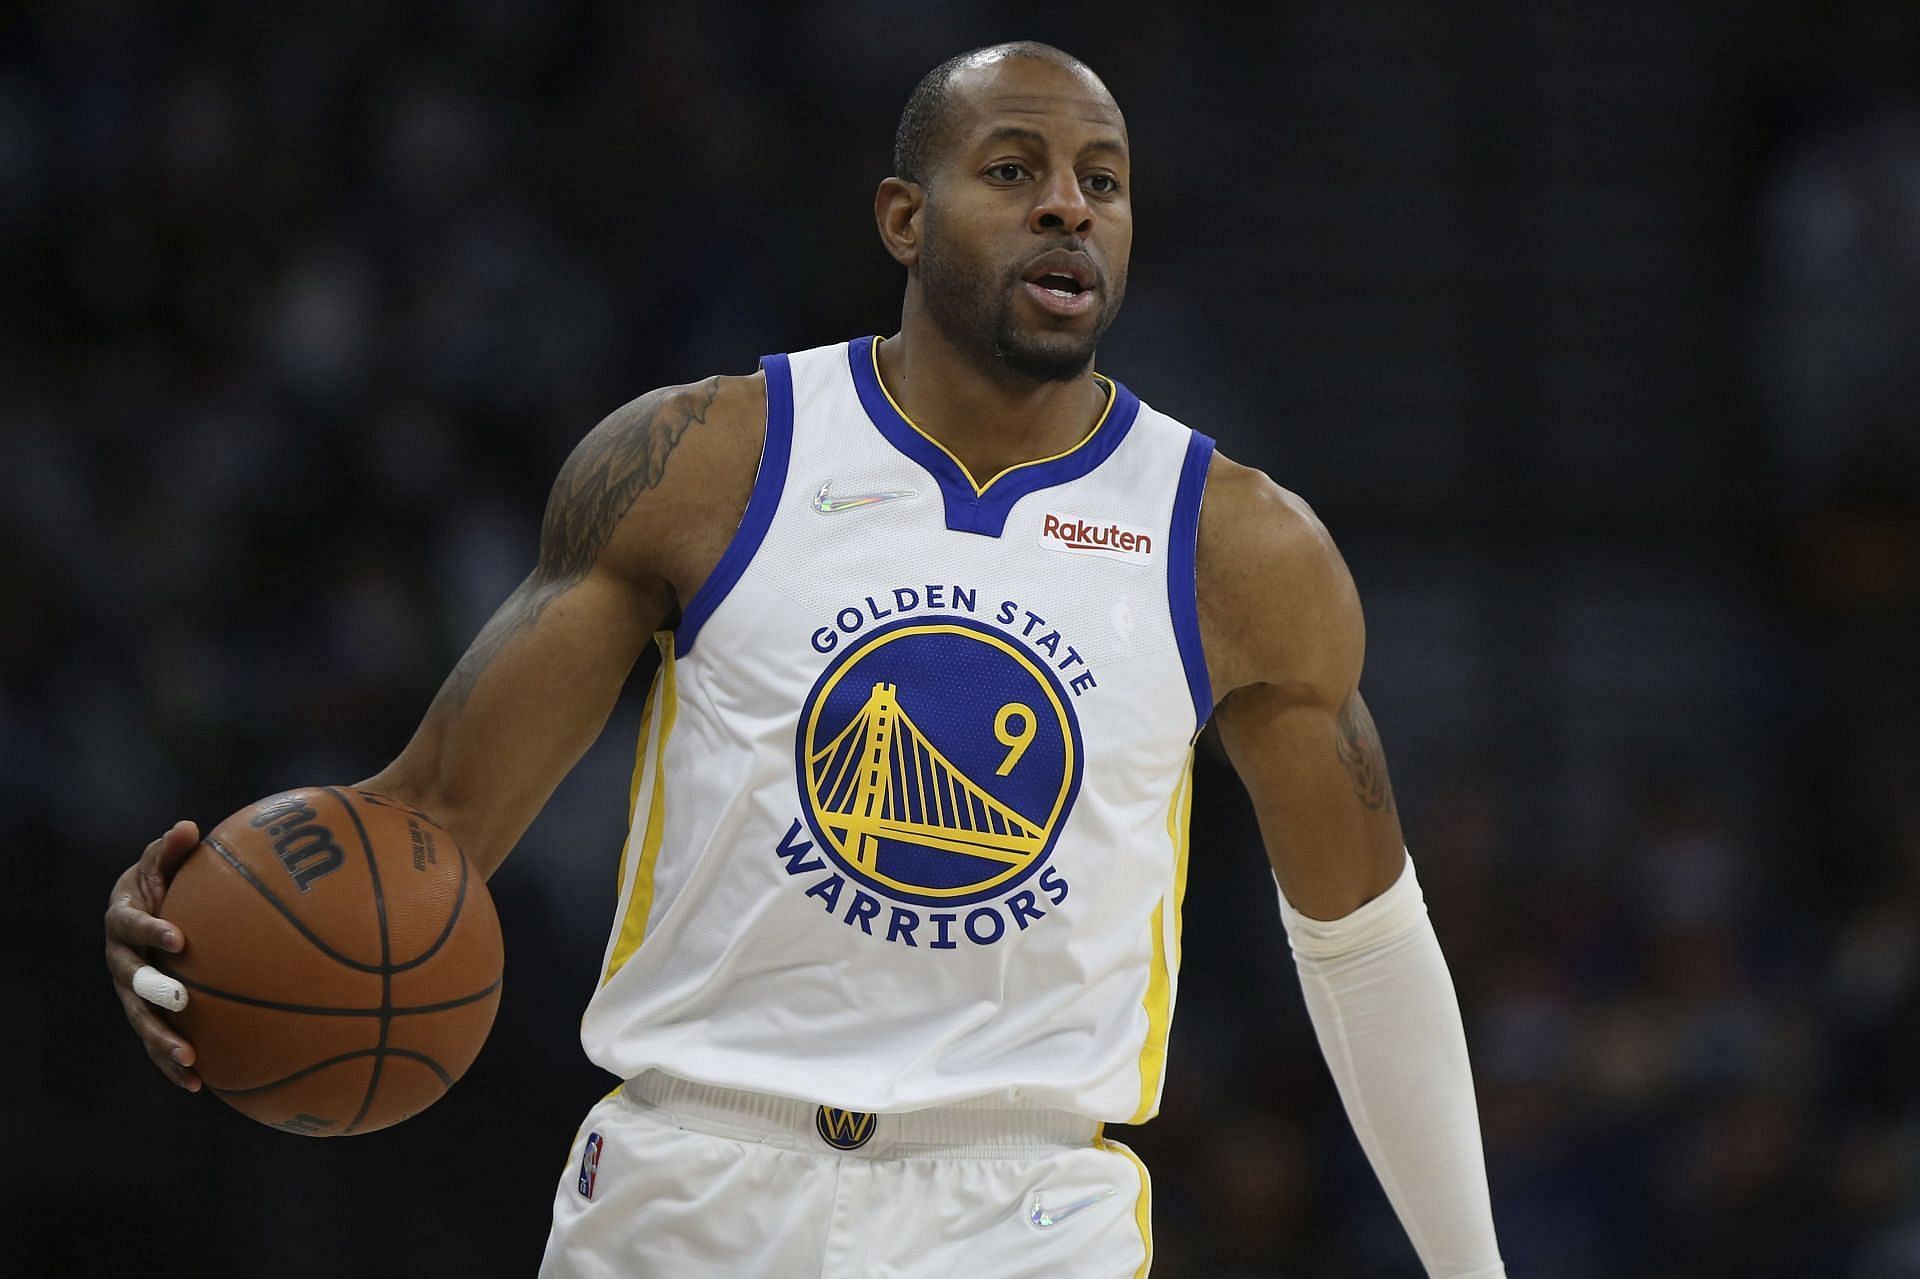 Andre Iguodala ponders owning NBA team after $200 million investment